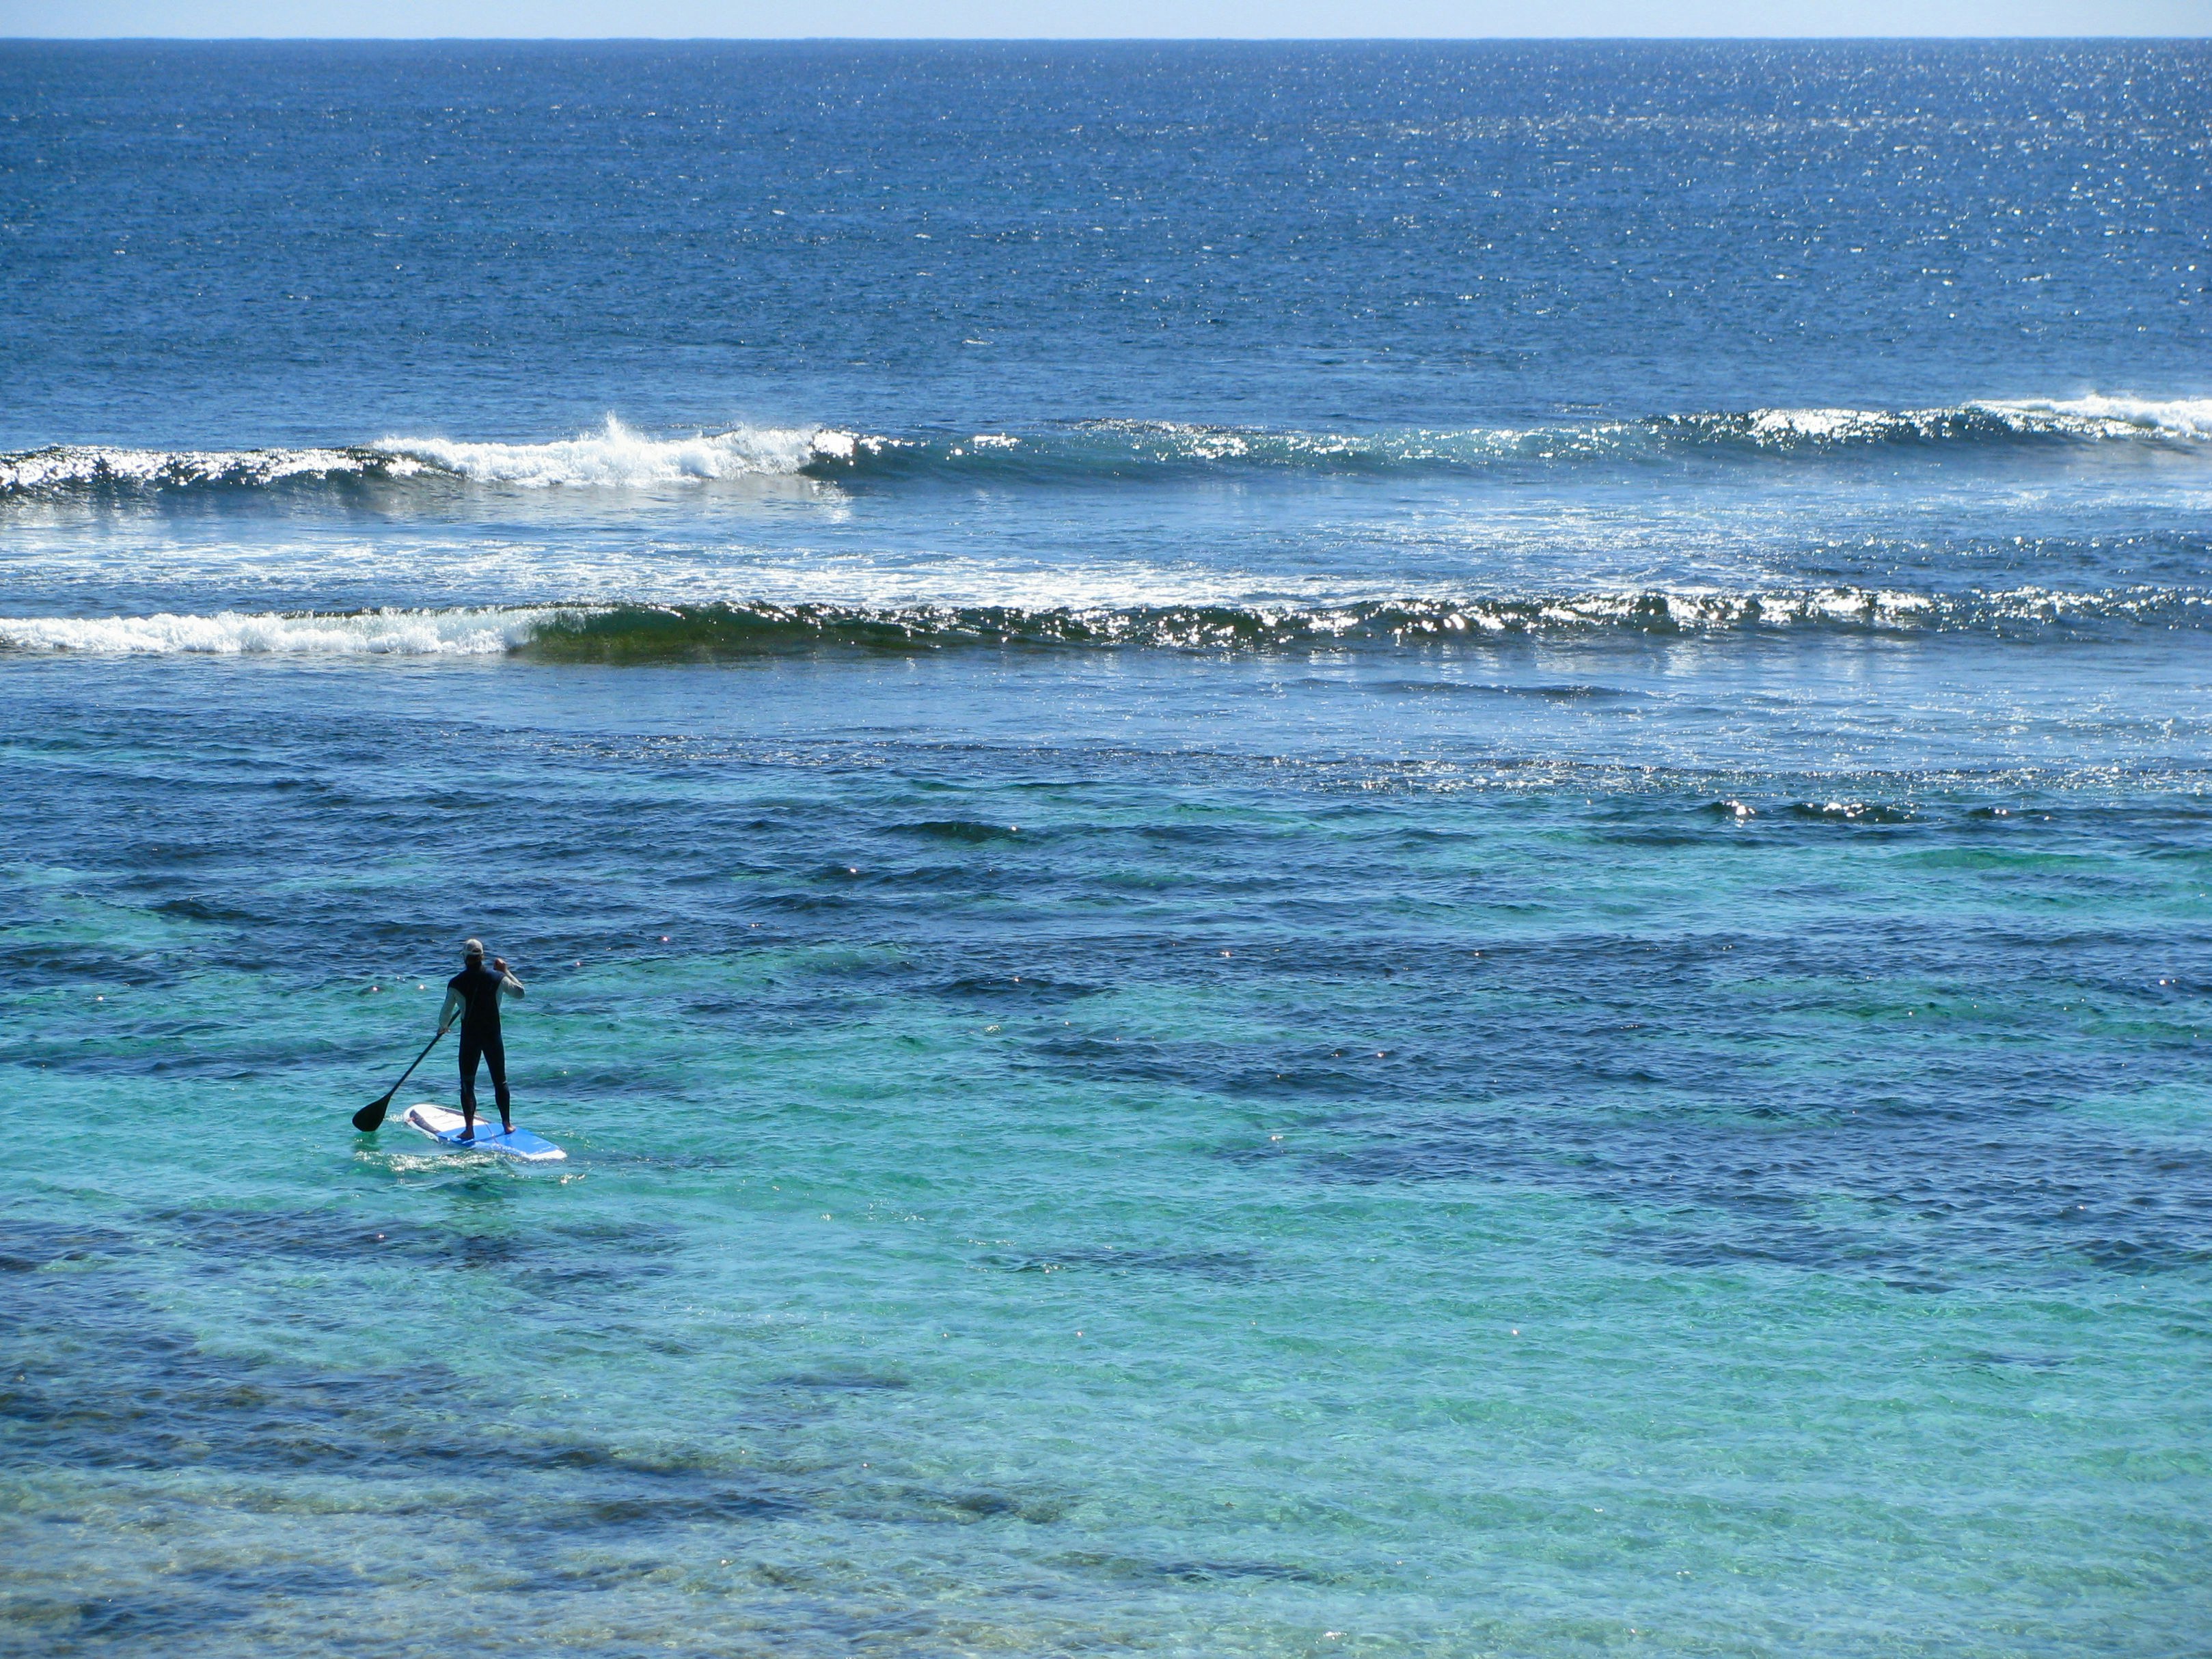 View of the back of a man in the distance, standing on a paddle board, paddling out alone into the ocean towards the waves; places for stand up paddle boarding